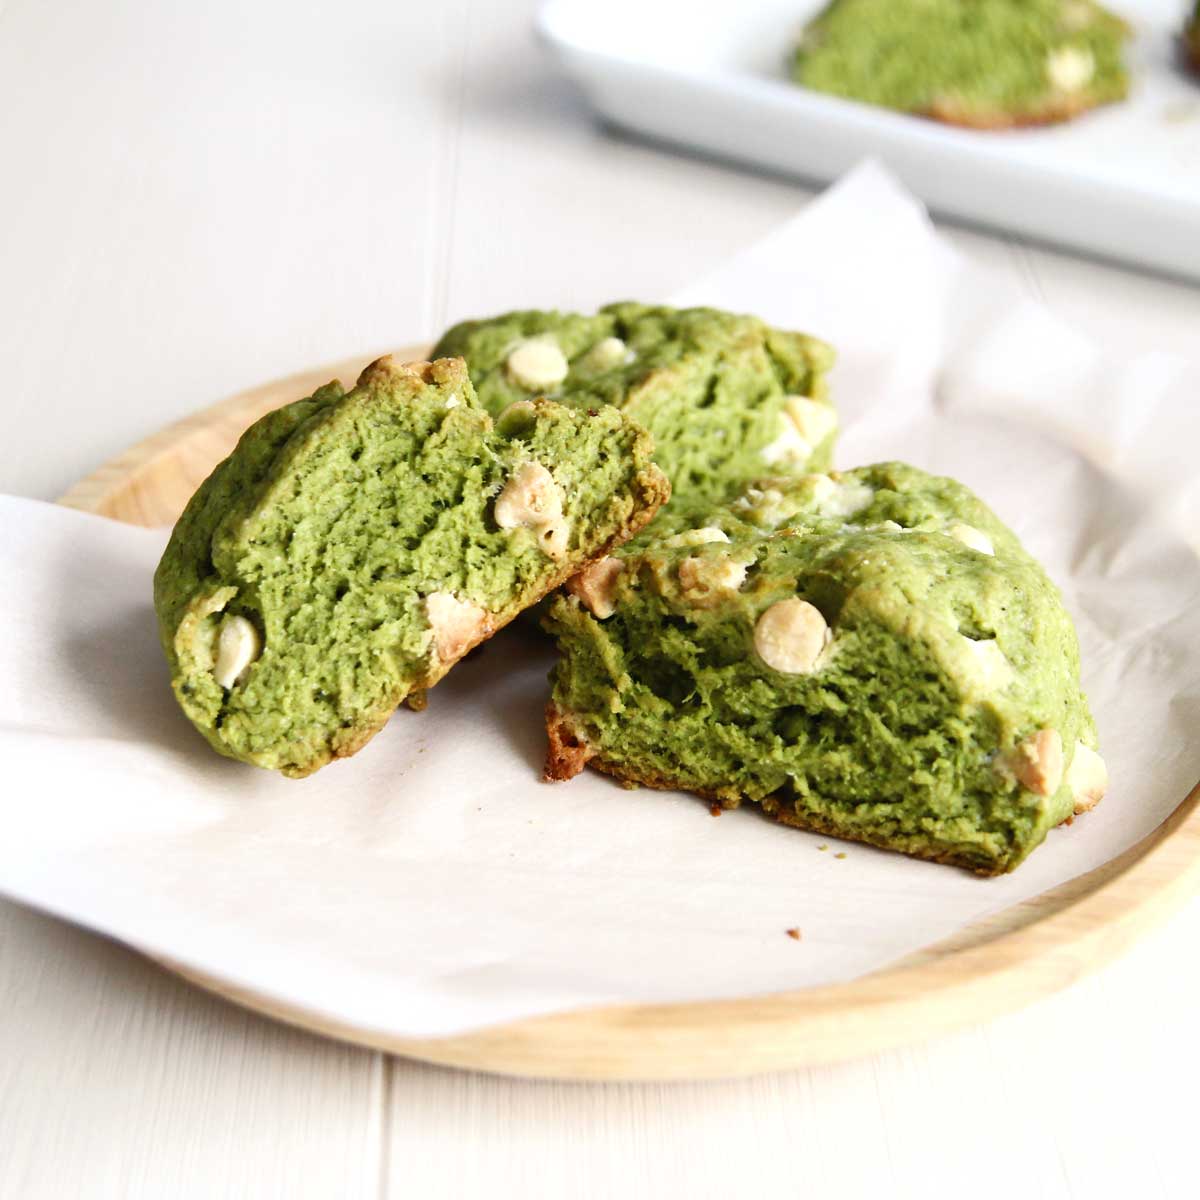 Homemade Matcha Scones with White Chocolate Chips (No Butter Required!) - Vegan Scones with Cornstarch